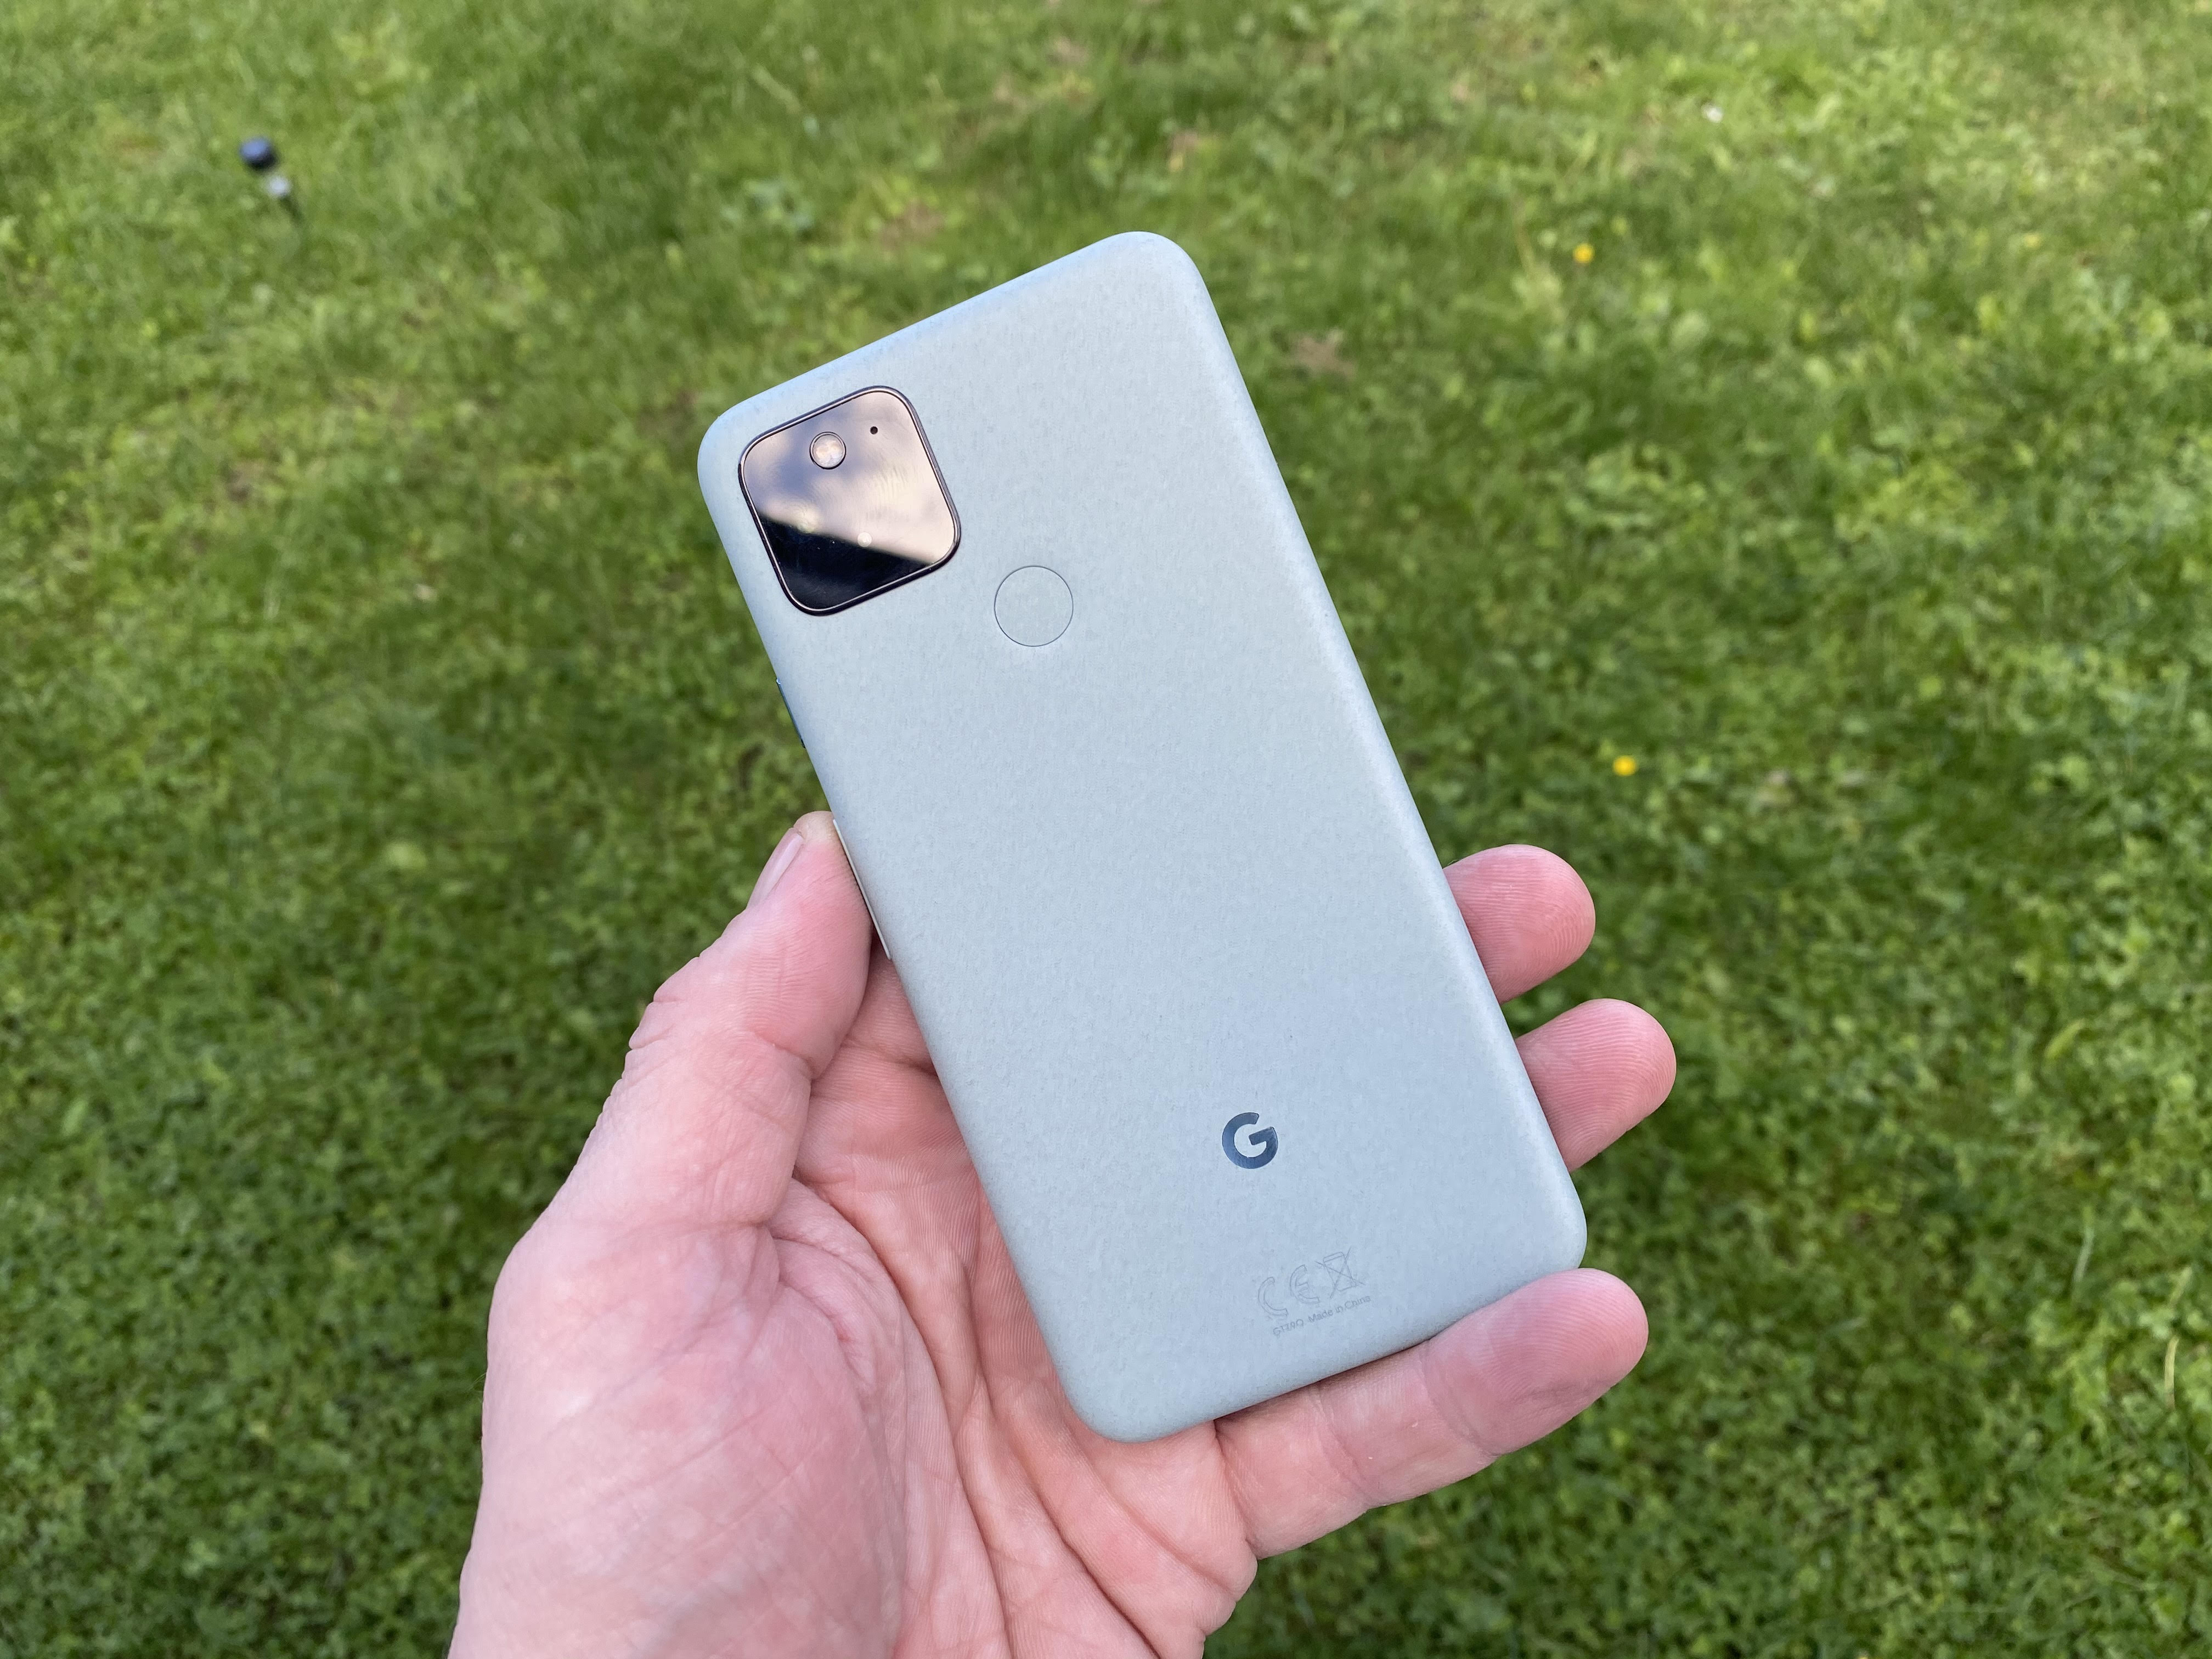 Unboxing, walkthrough first impressions - The Google Pixel 5 5G in 